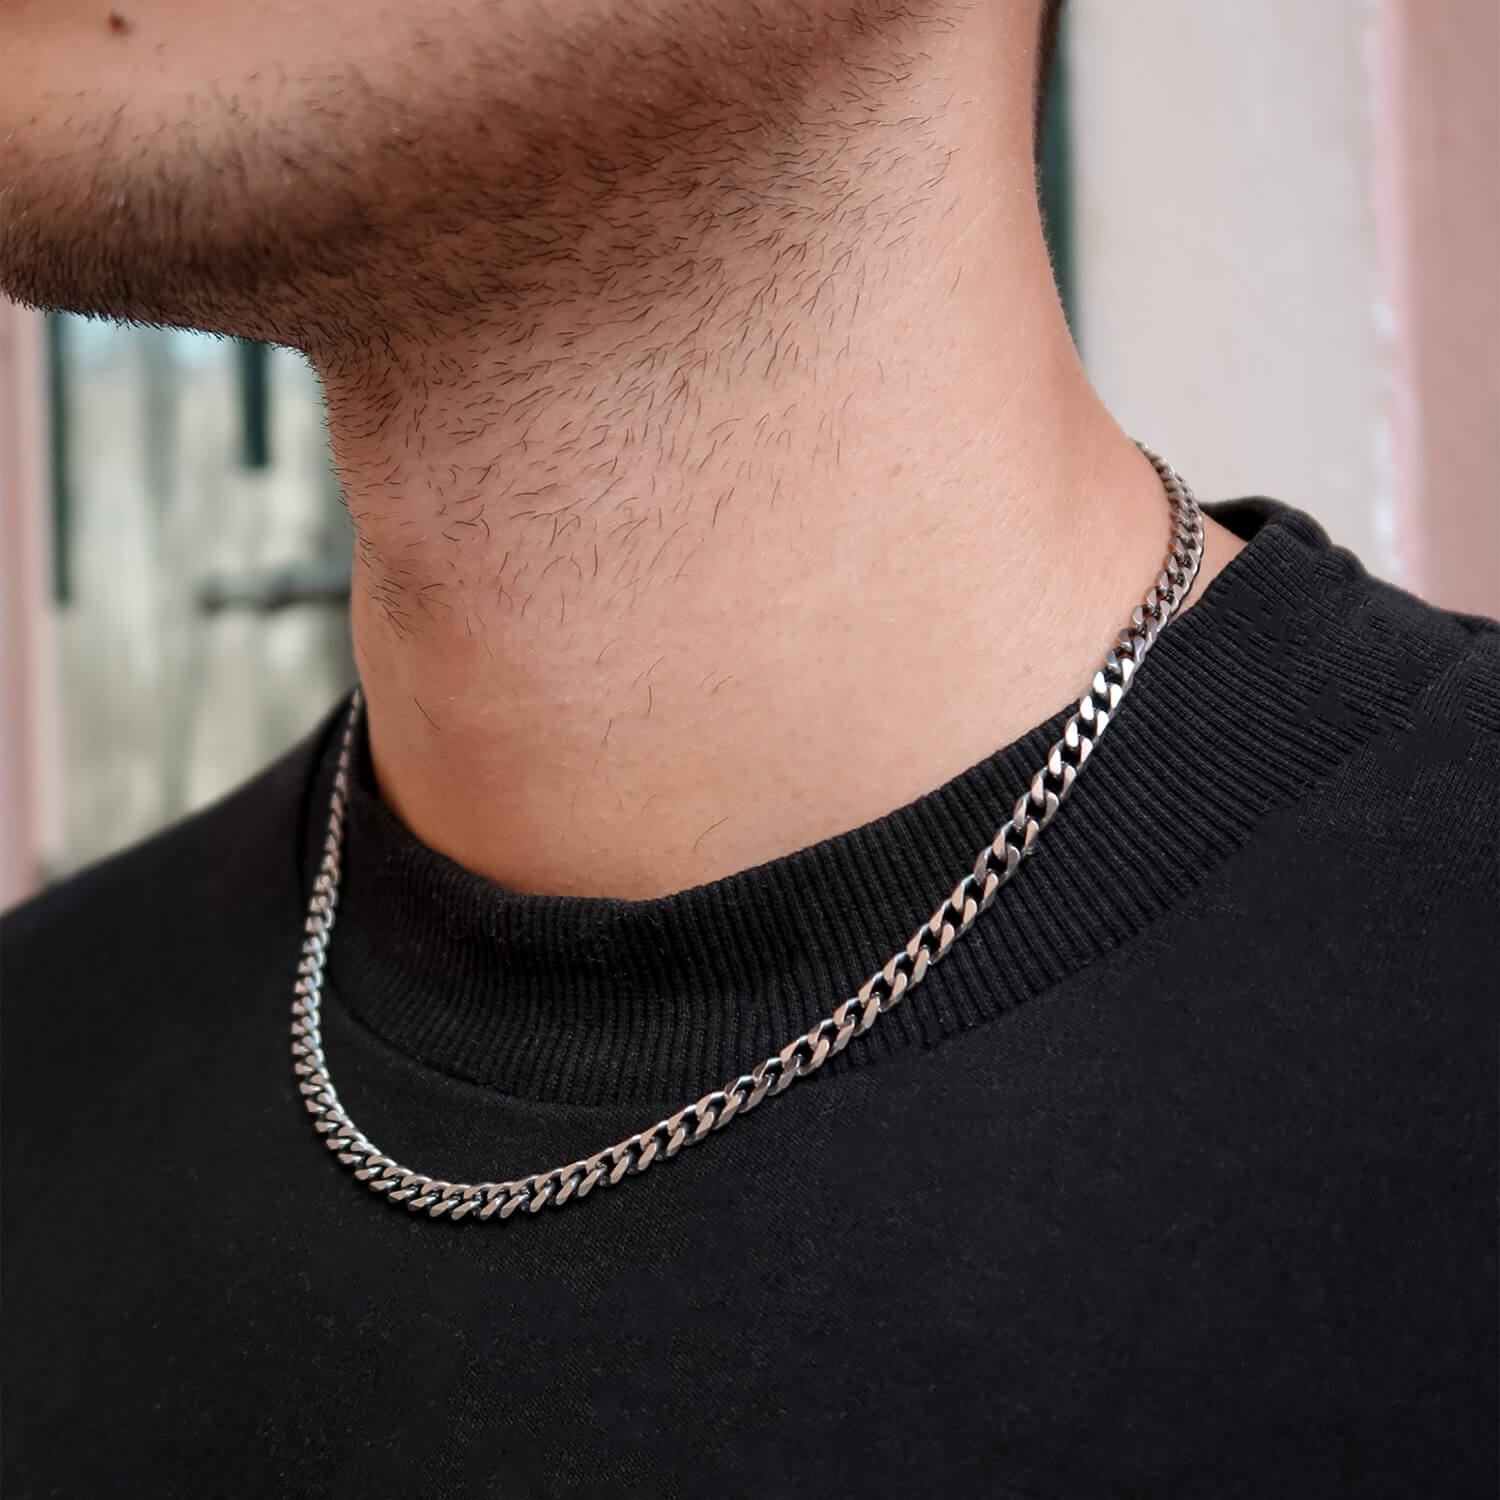 5mm silver cuban chain on neck